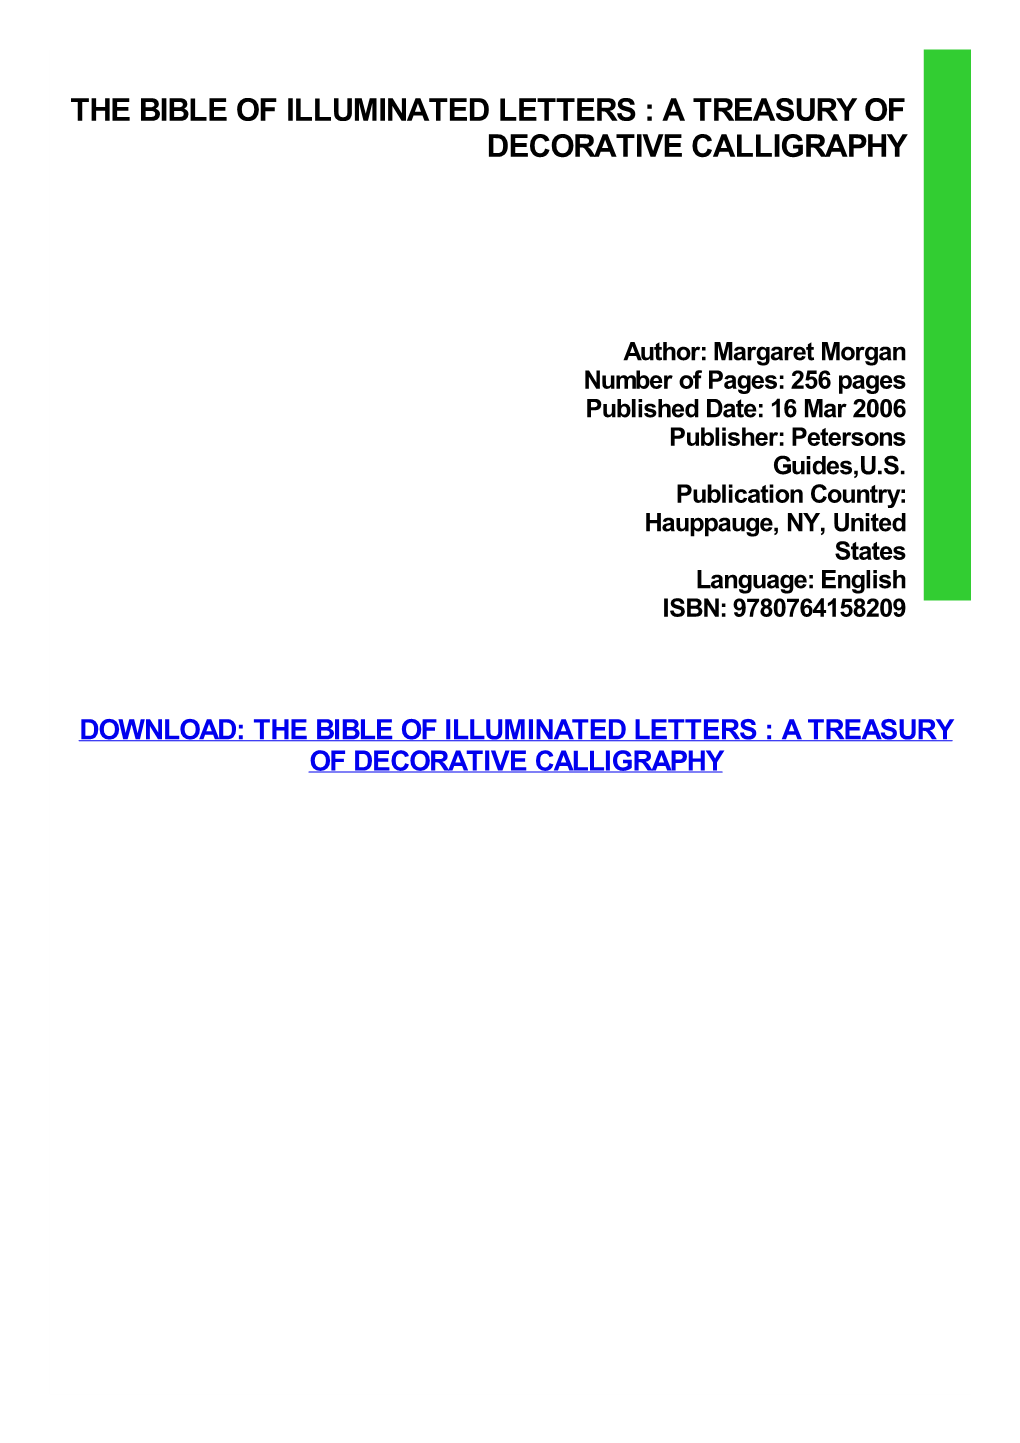 The Bible of Illuminated Letters : a Treasury of Decorative Calligraphy